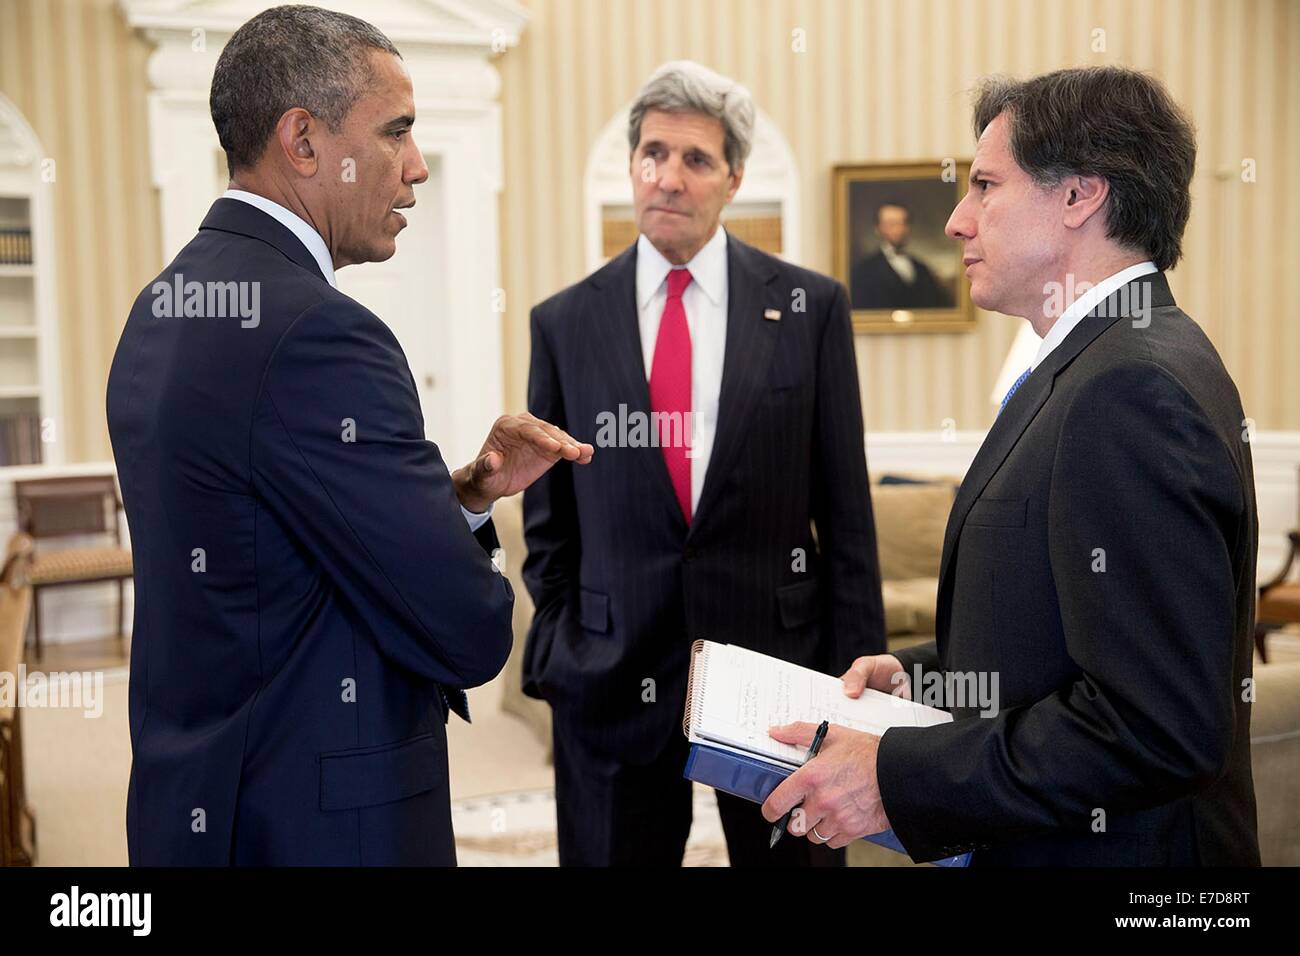 US President Barack Obama talks with Secretary of State John Kerry and Tony Blinken, Deputy National Security Advisor, right, at the conclusion of their meeting in the Oval Office of the White House July 18, 2014 in Washington, DC. Stock Photo